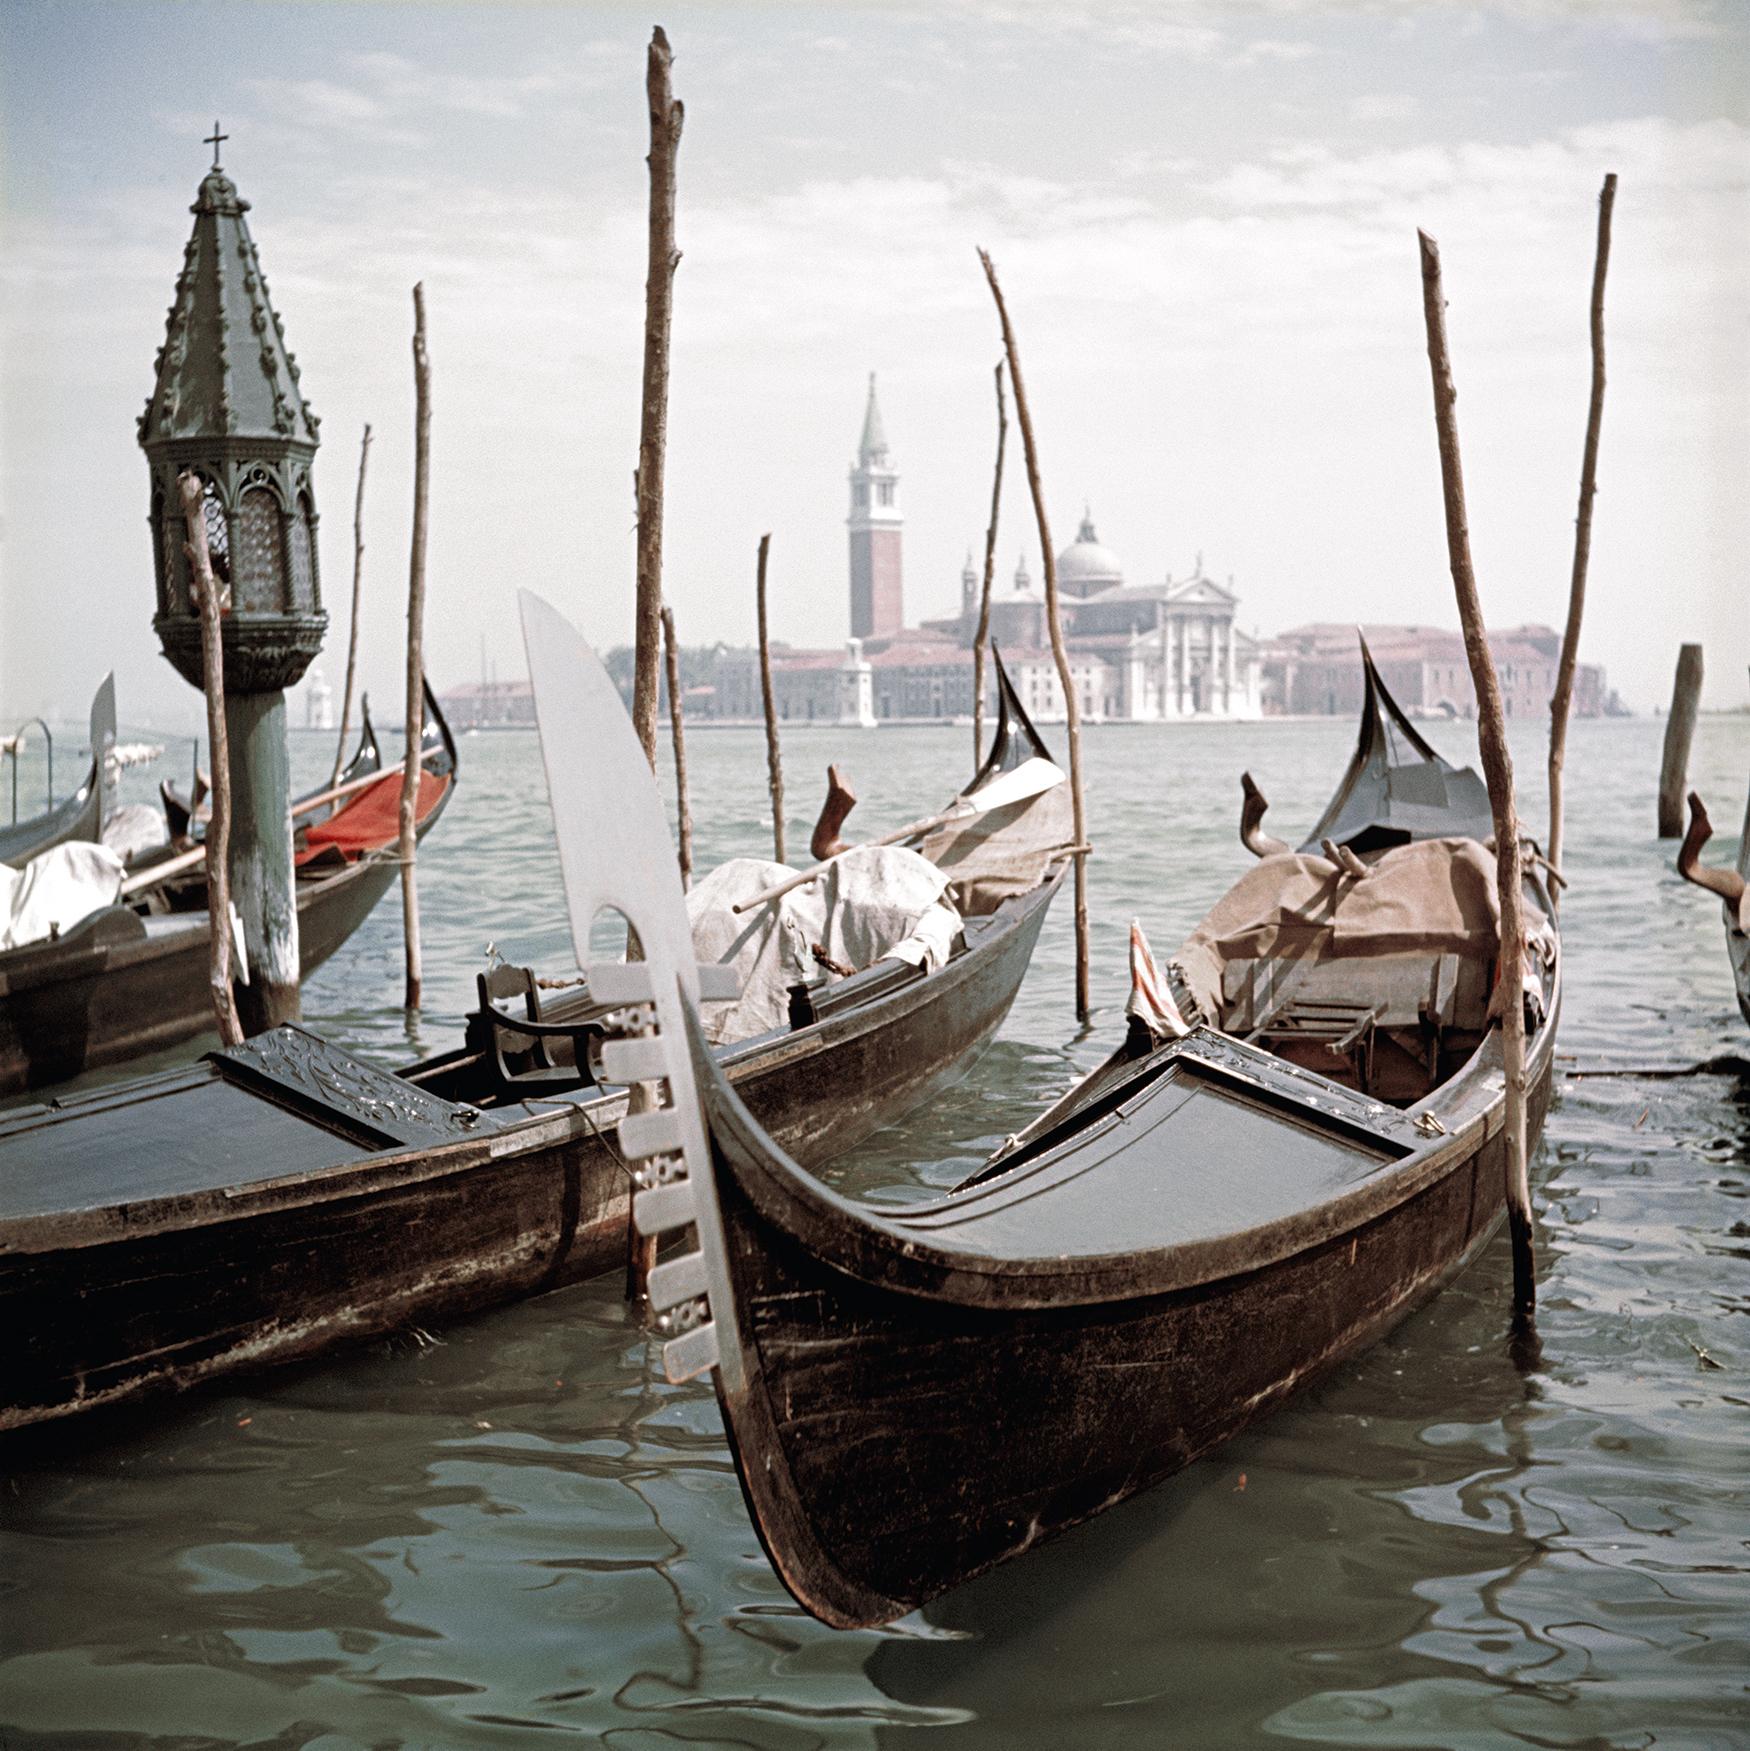 Gondolas moored in Venice, 1957. In the background is the Church of San Giorgio Maggiore, on San Giorgio Maggiore island.

Captured with the exquisite clarity and charm that epitomizes Slim Aarons's work, this 1957 photograph, "Gondolas moored in